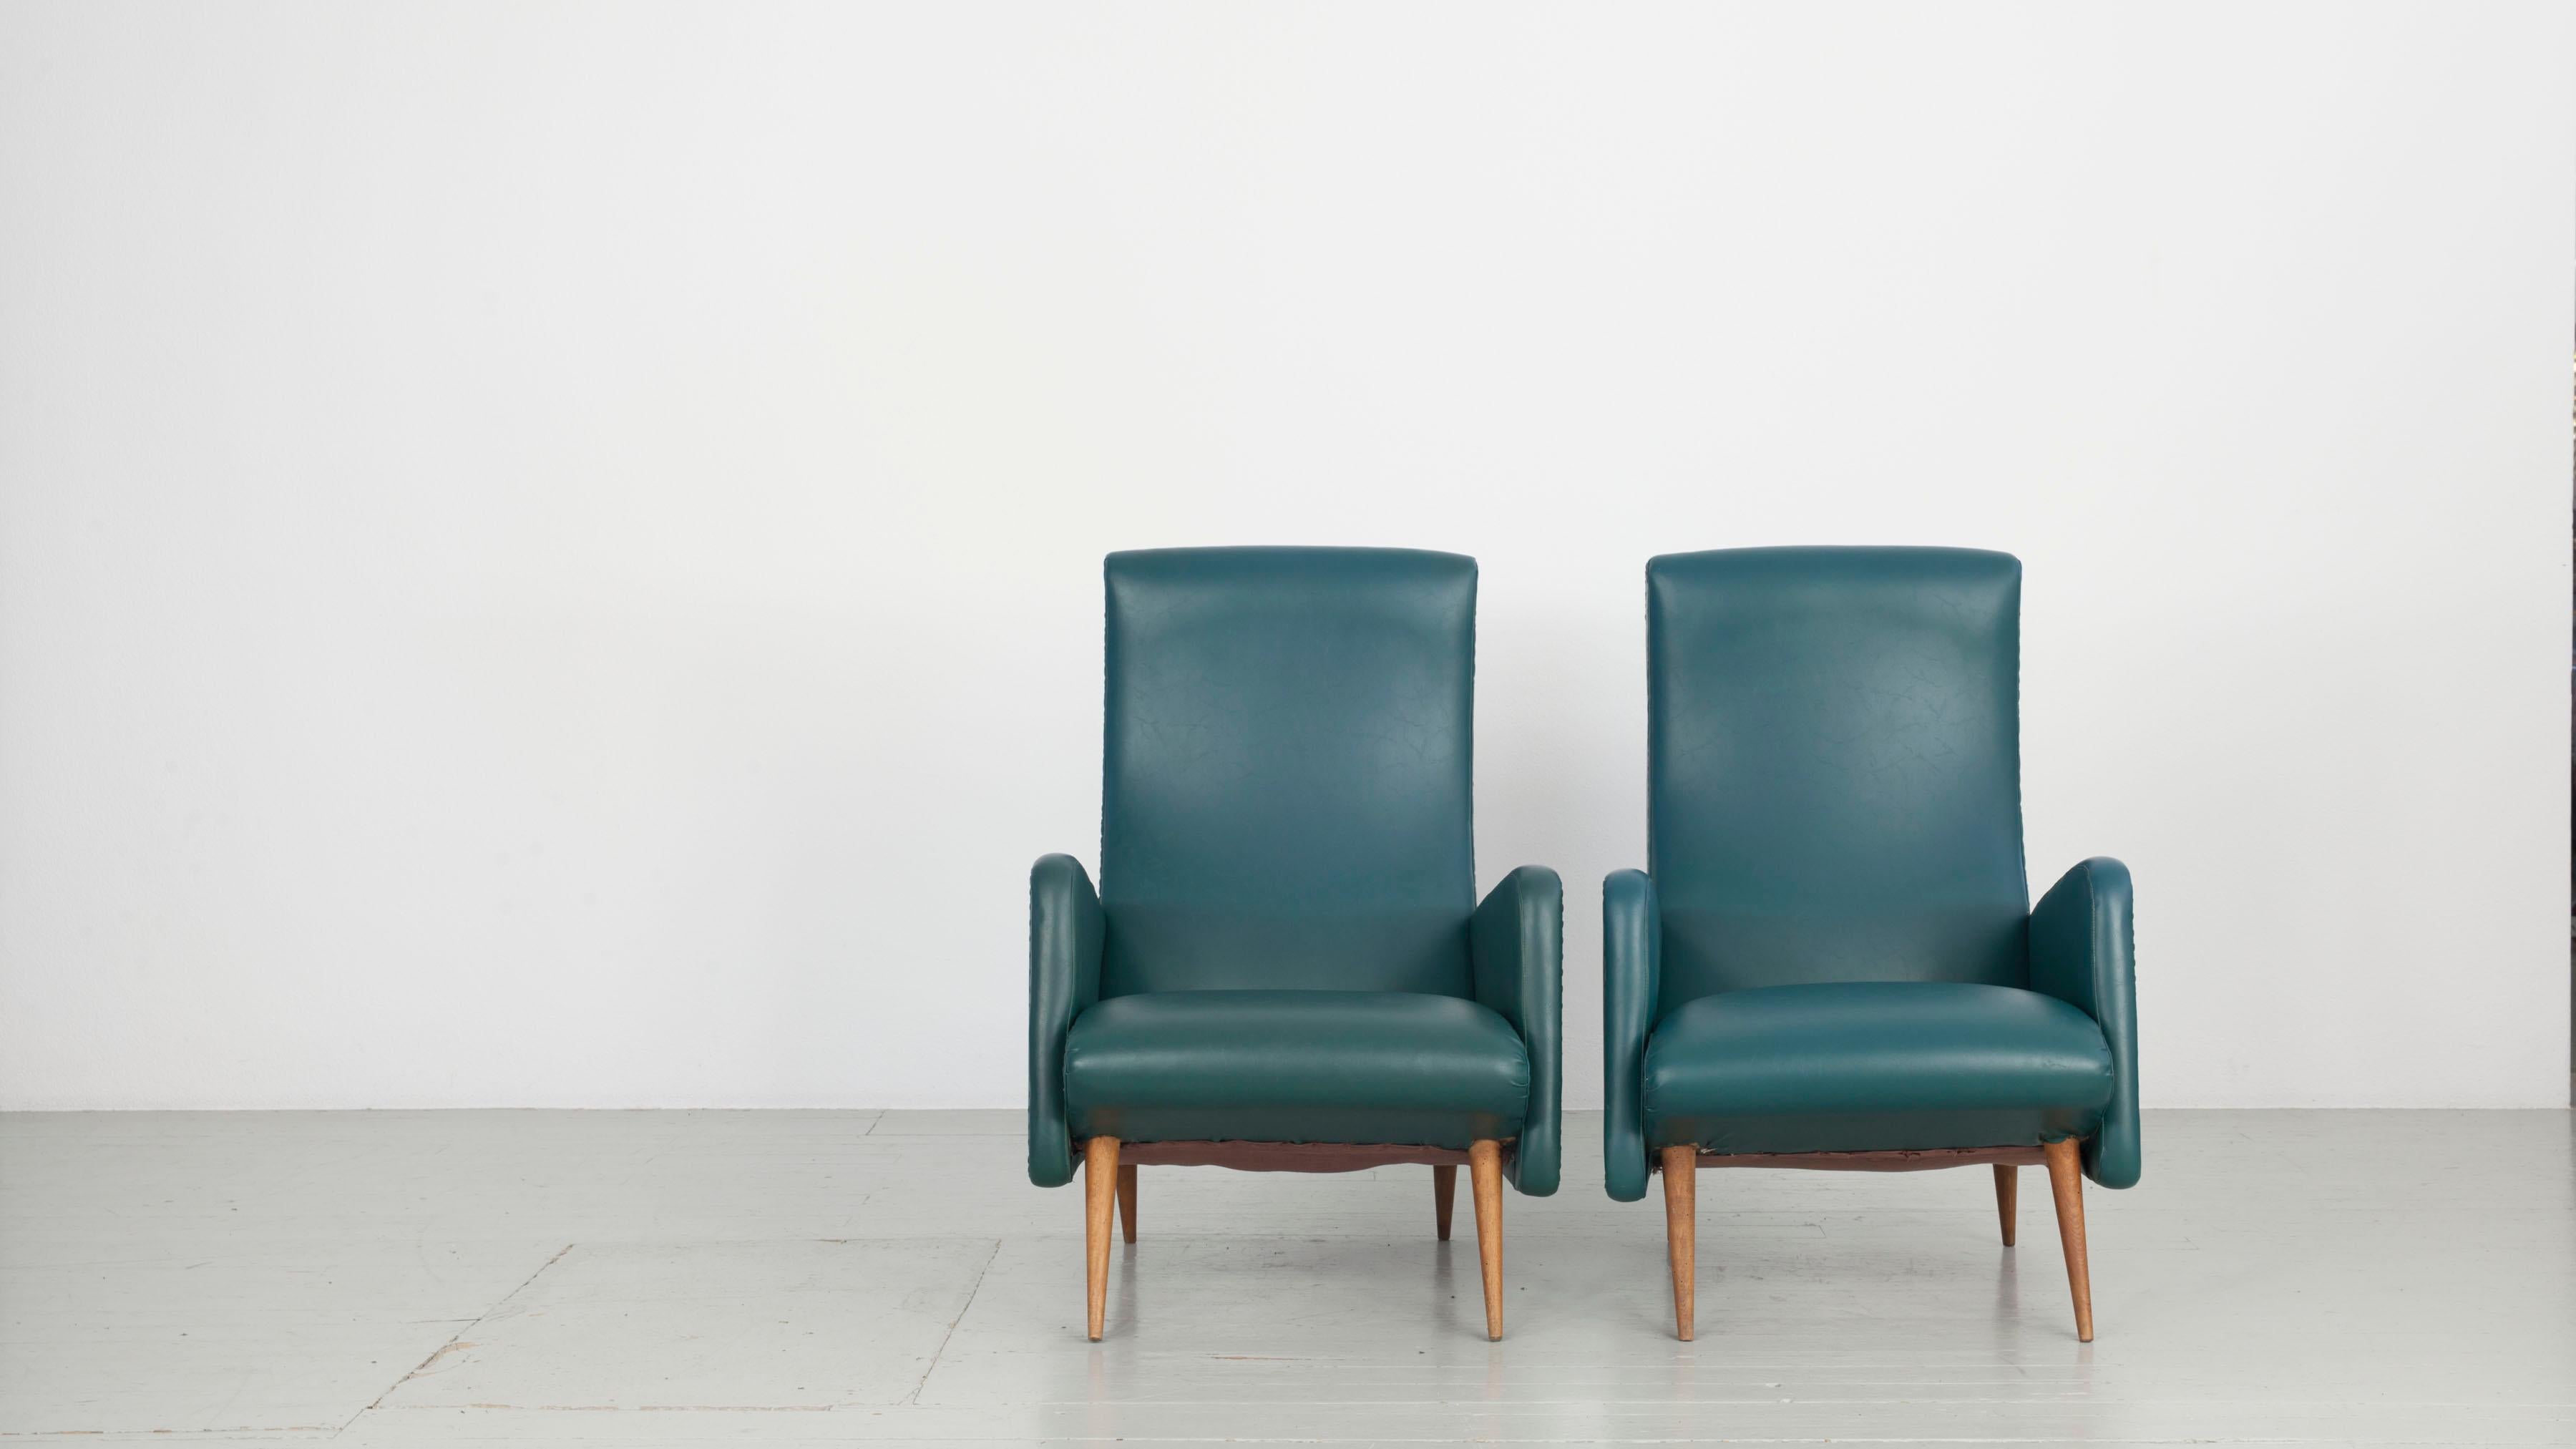 Wood Pair of Italian Chairs in Original Green Imitation Leather Upholstery, 1950 For Sale